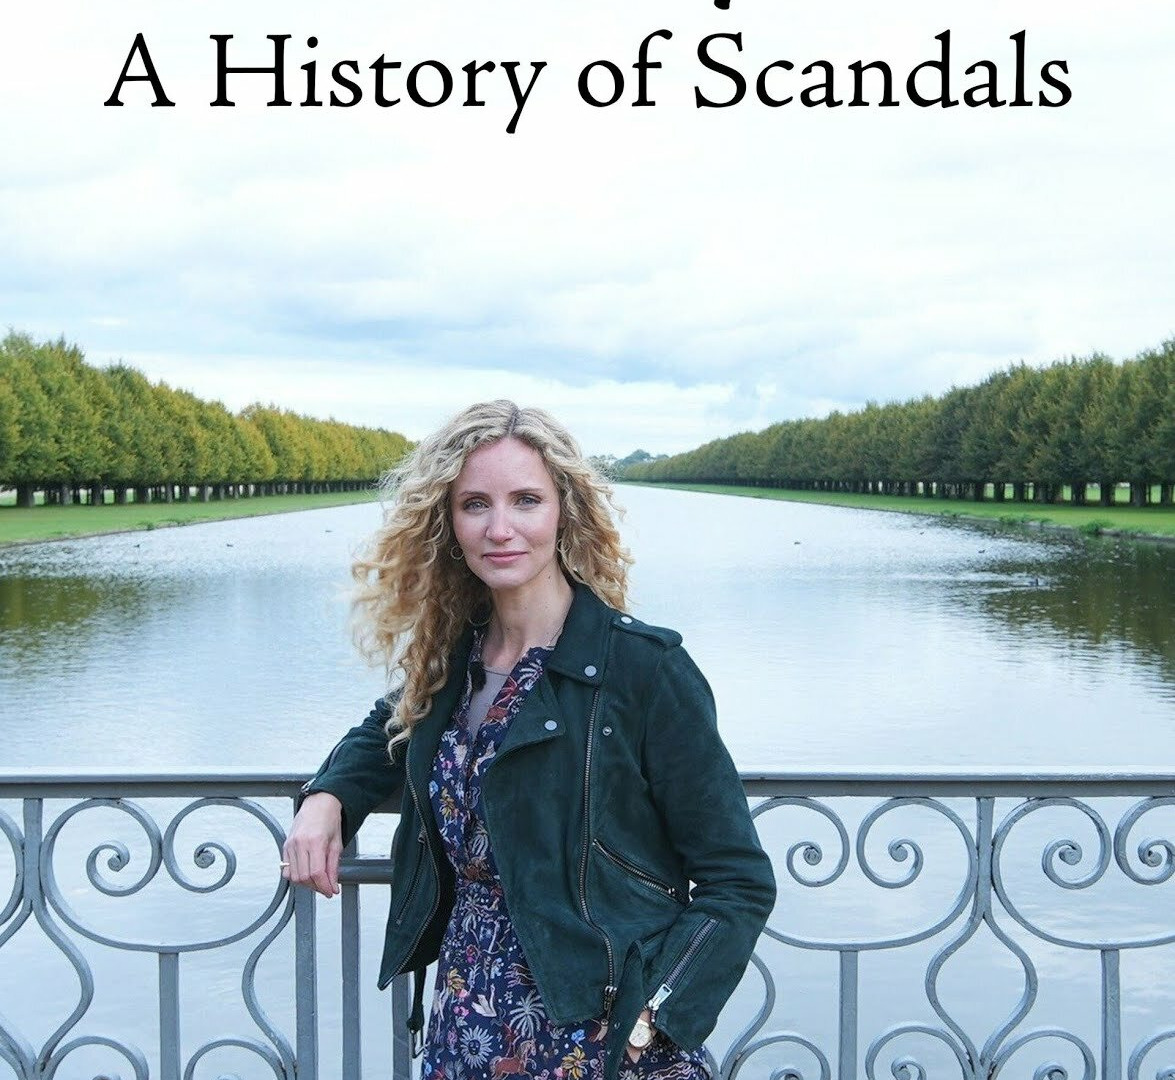 Show The Royals: A History of Scandals